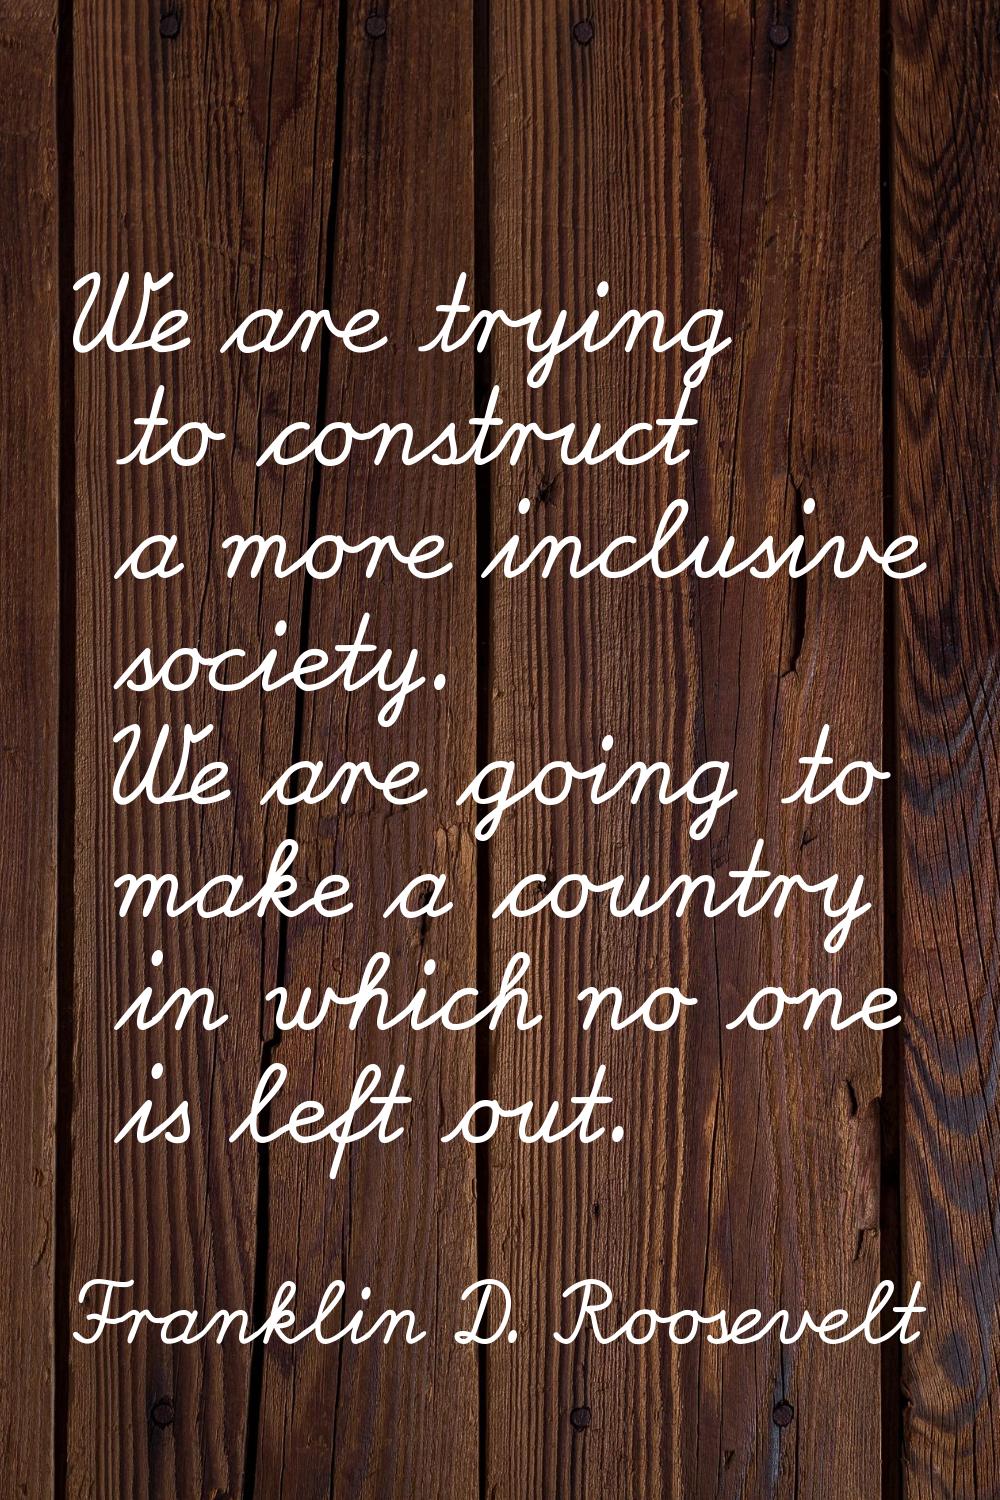 We are trying to construct a more inclusive society. We are going to make a country in which no one